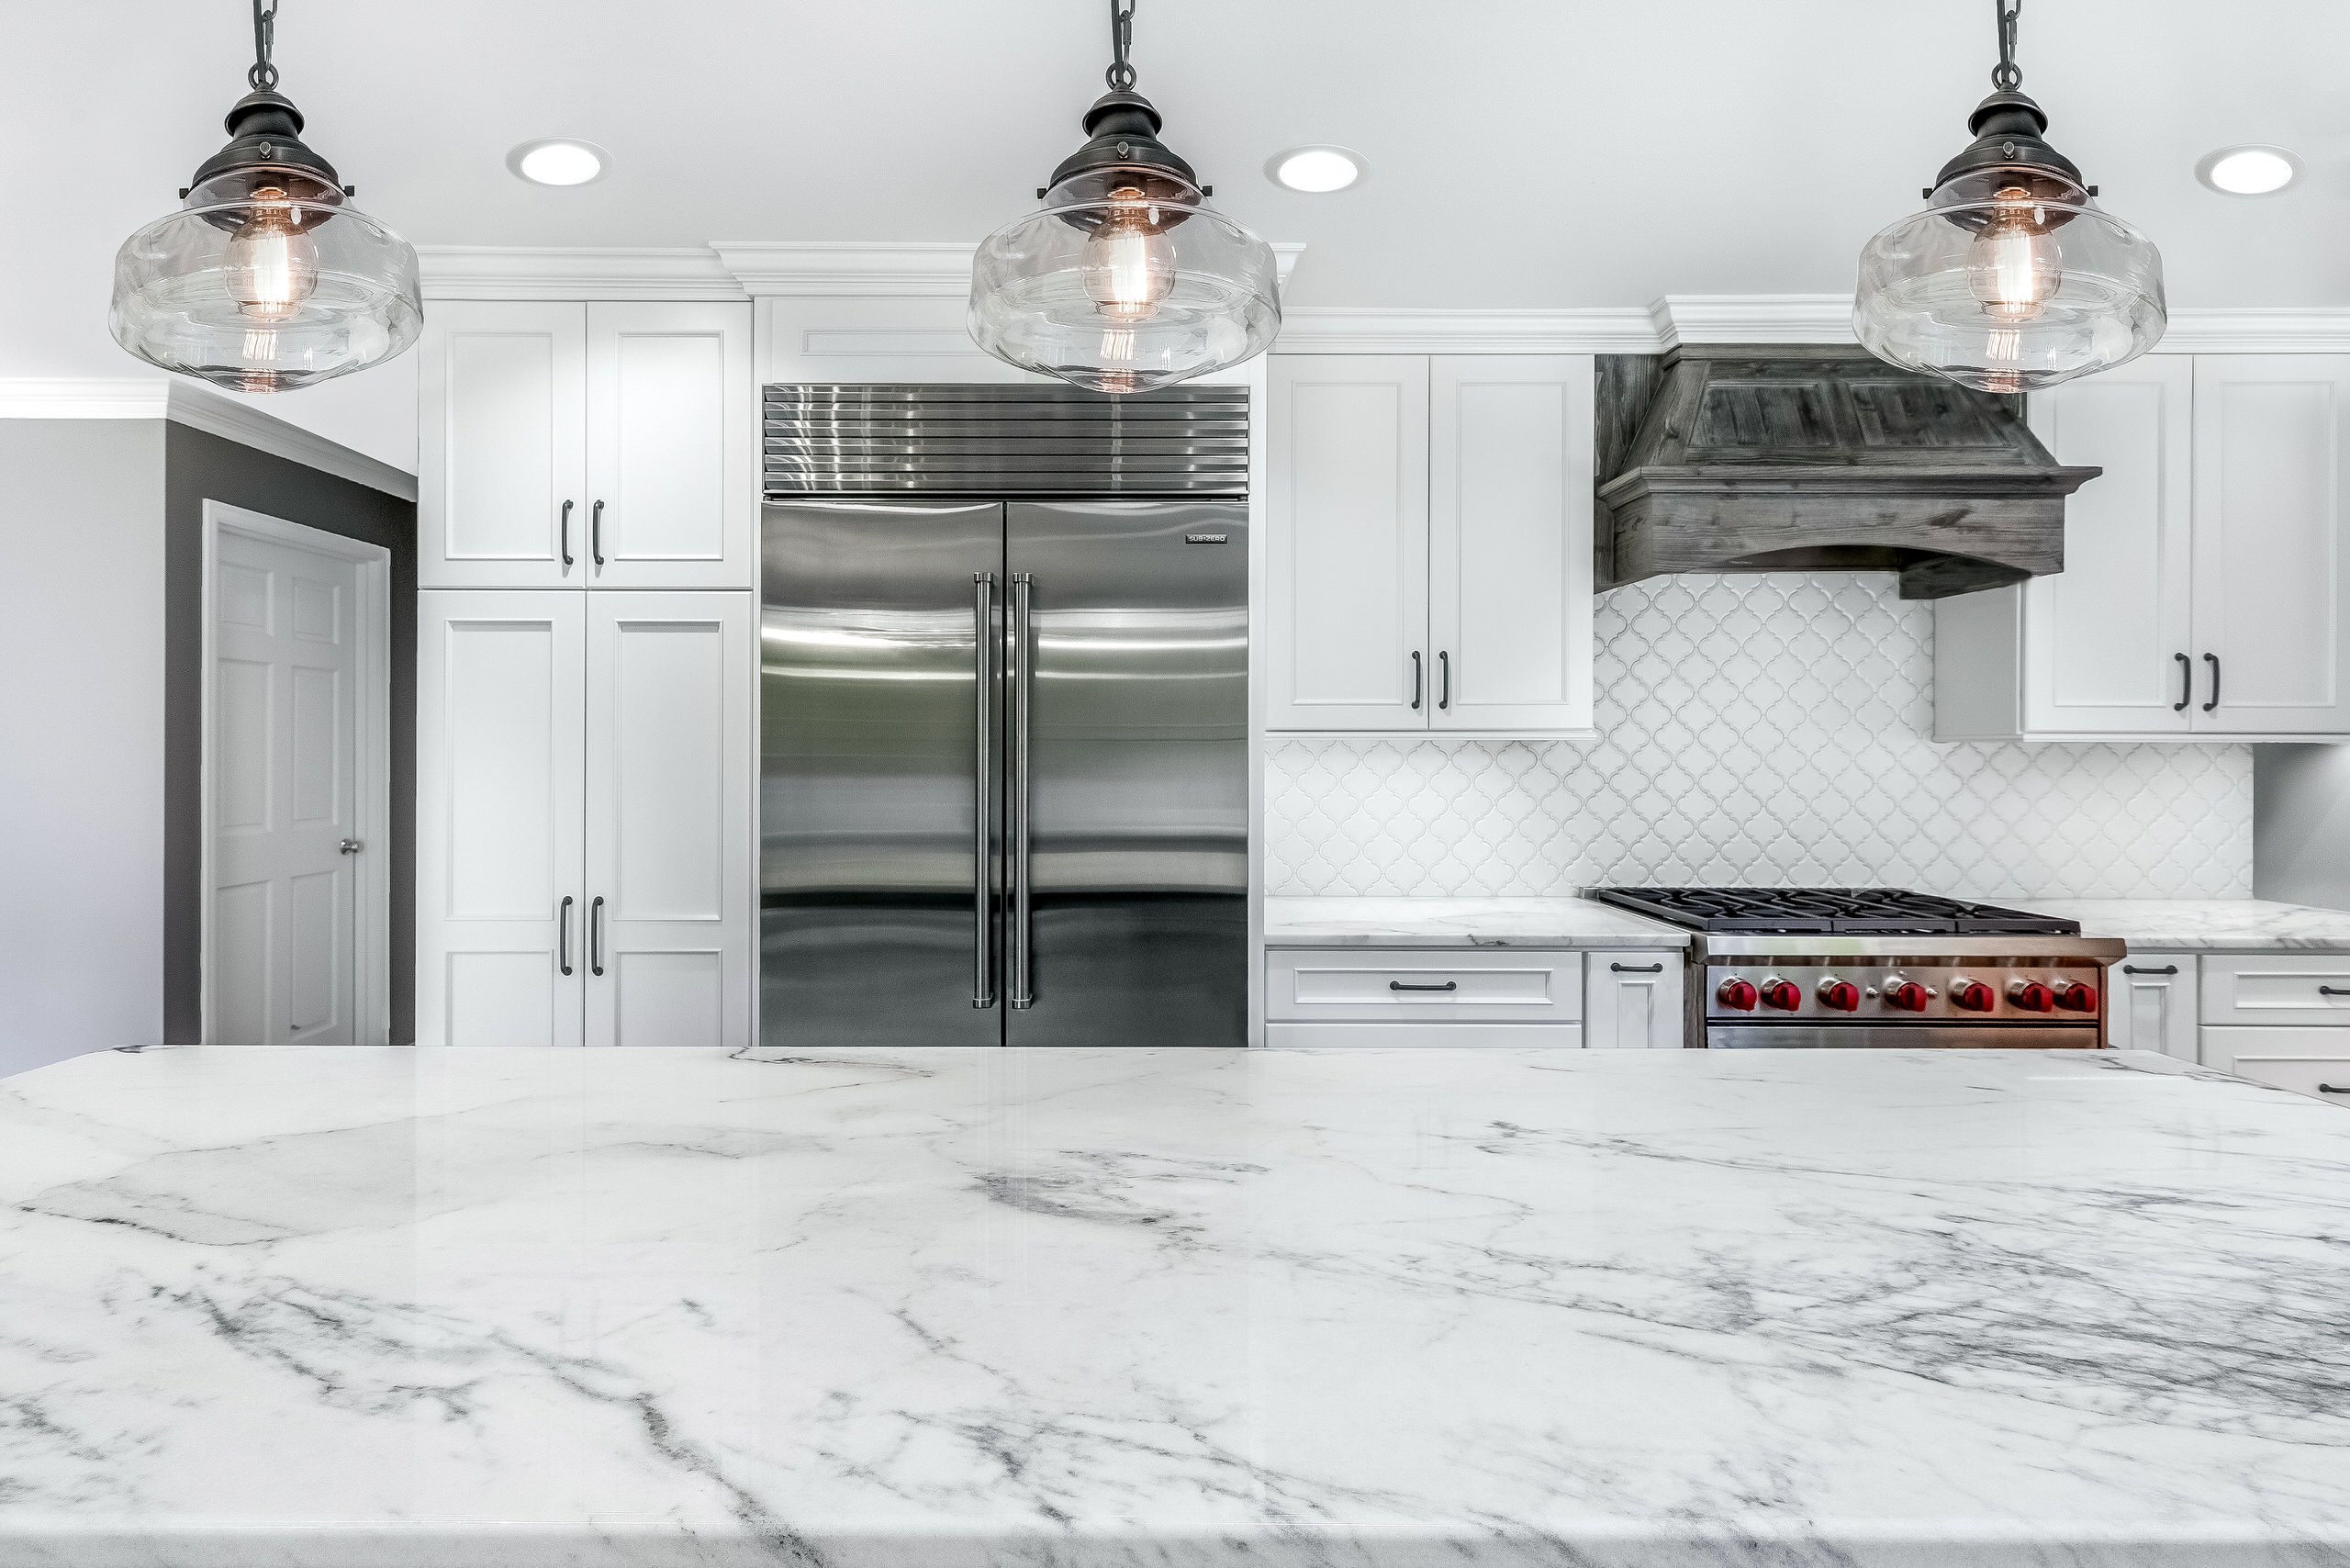 Bellevue Kitchen - White and Rustic Gray